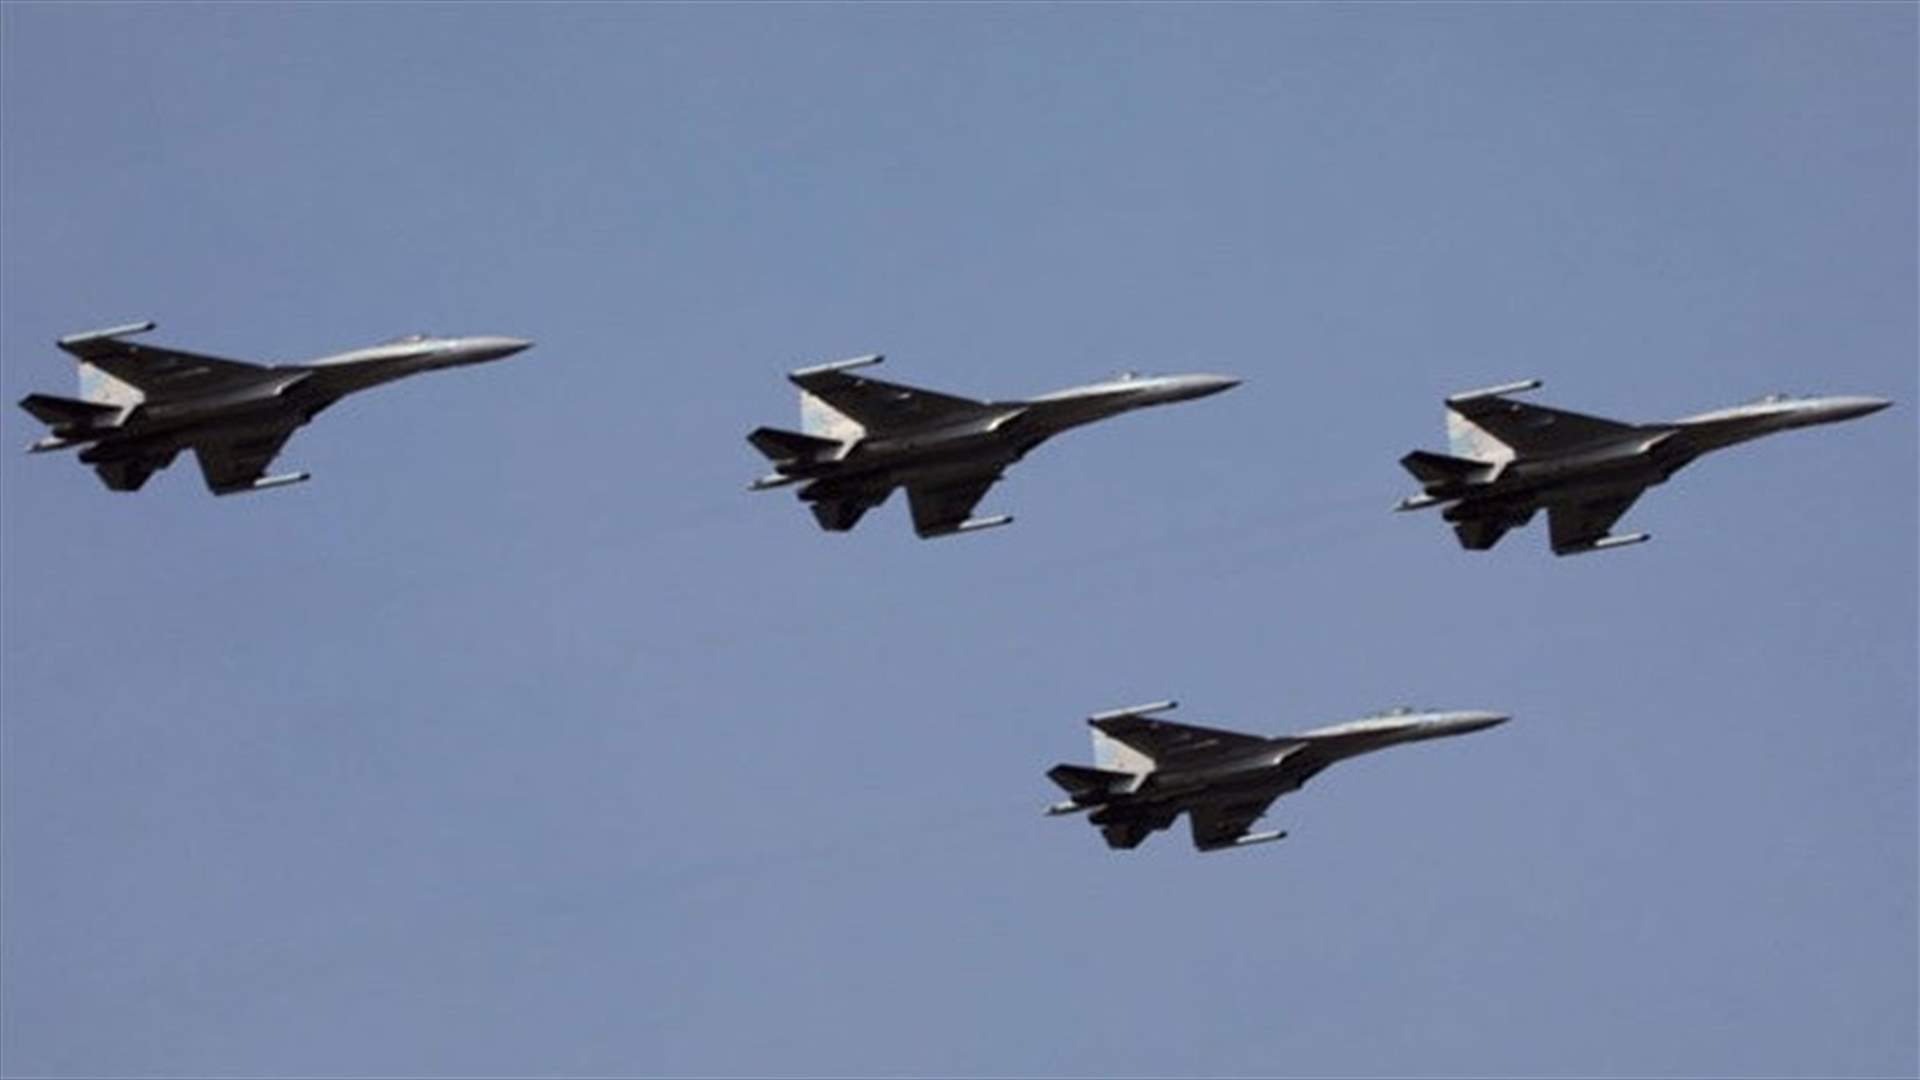 Russia to deliver 10 Su-35 fighter jets to China this year - Ifax